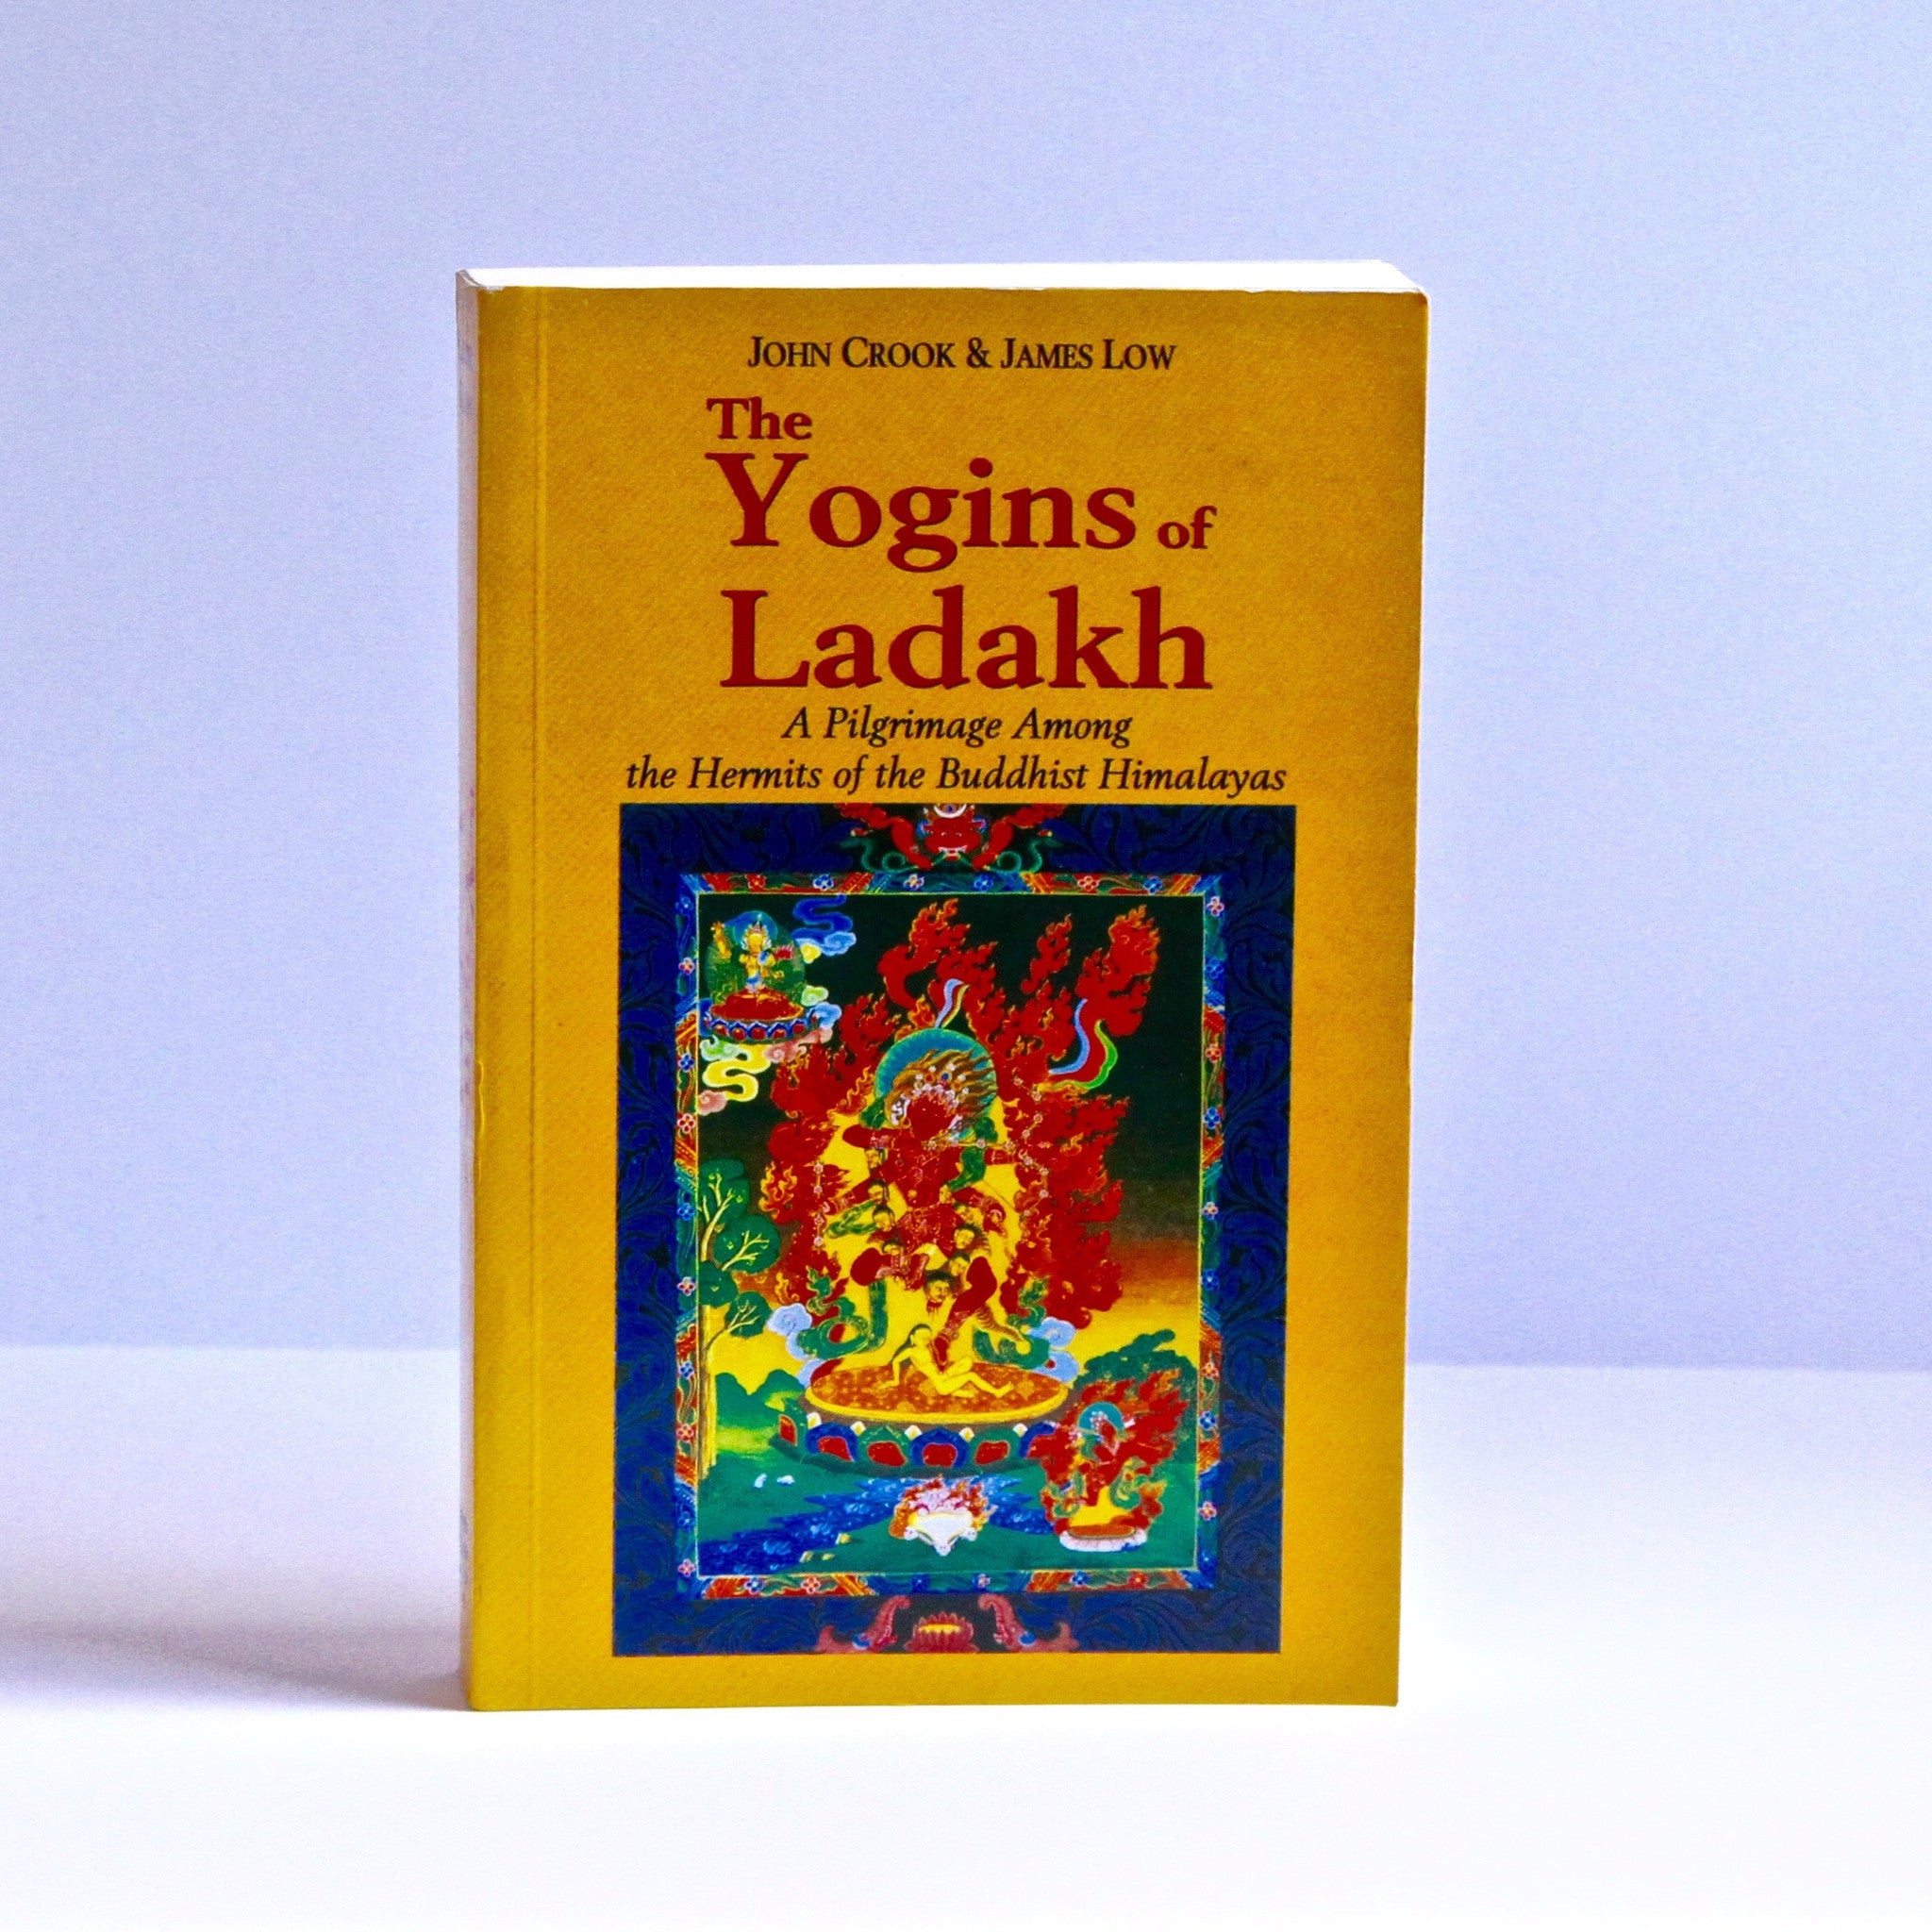 The Yogins of Ladakh: A Pilgrimage Among the Hermits of the Buddhist Himalayas by John Crook & James Low